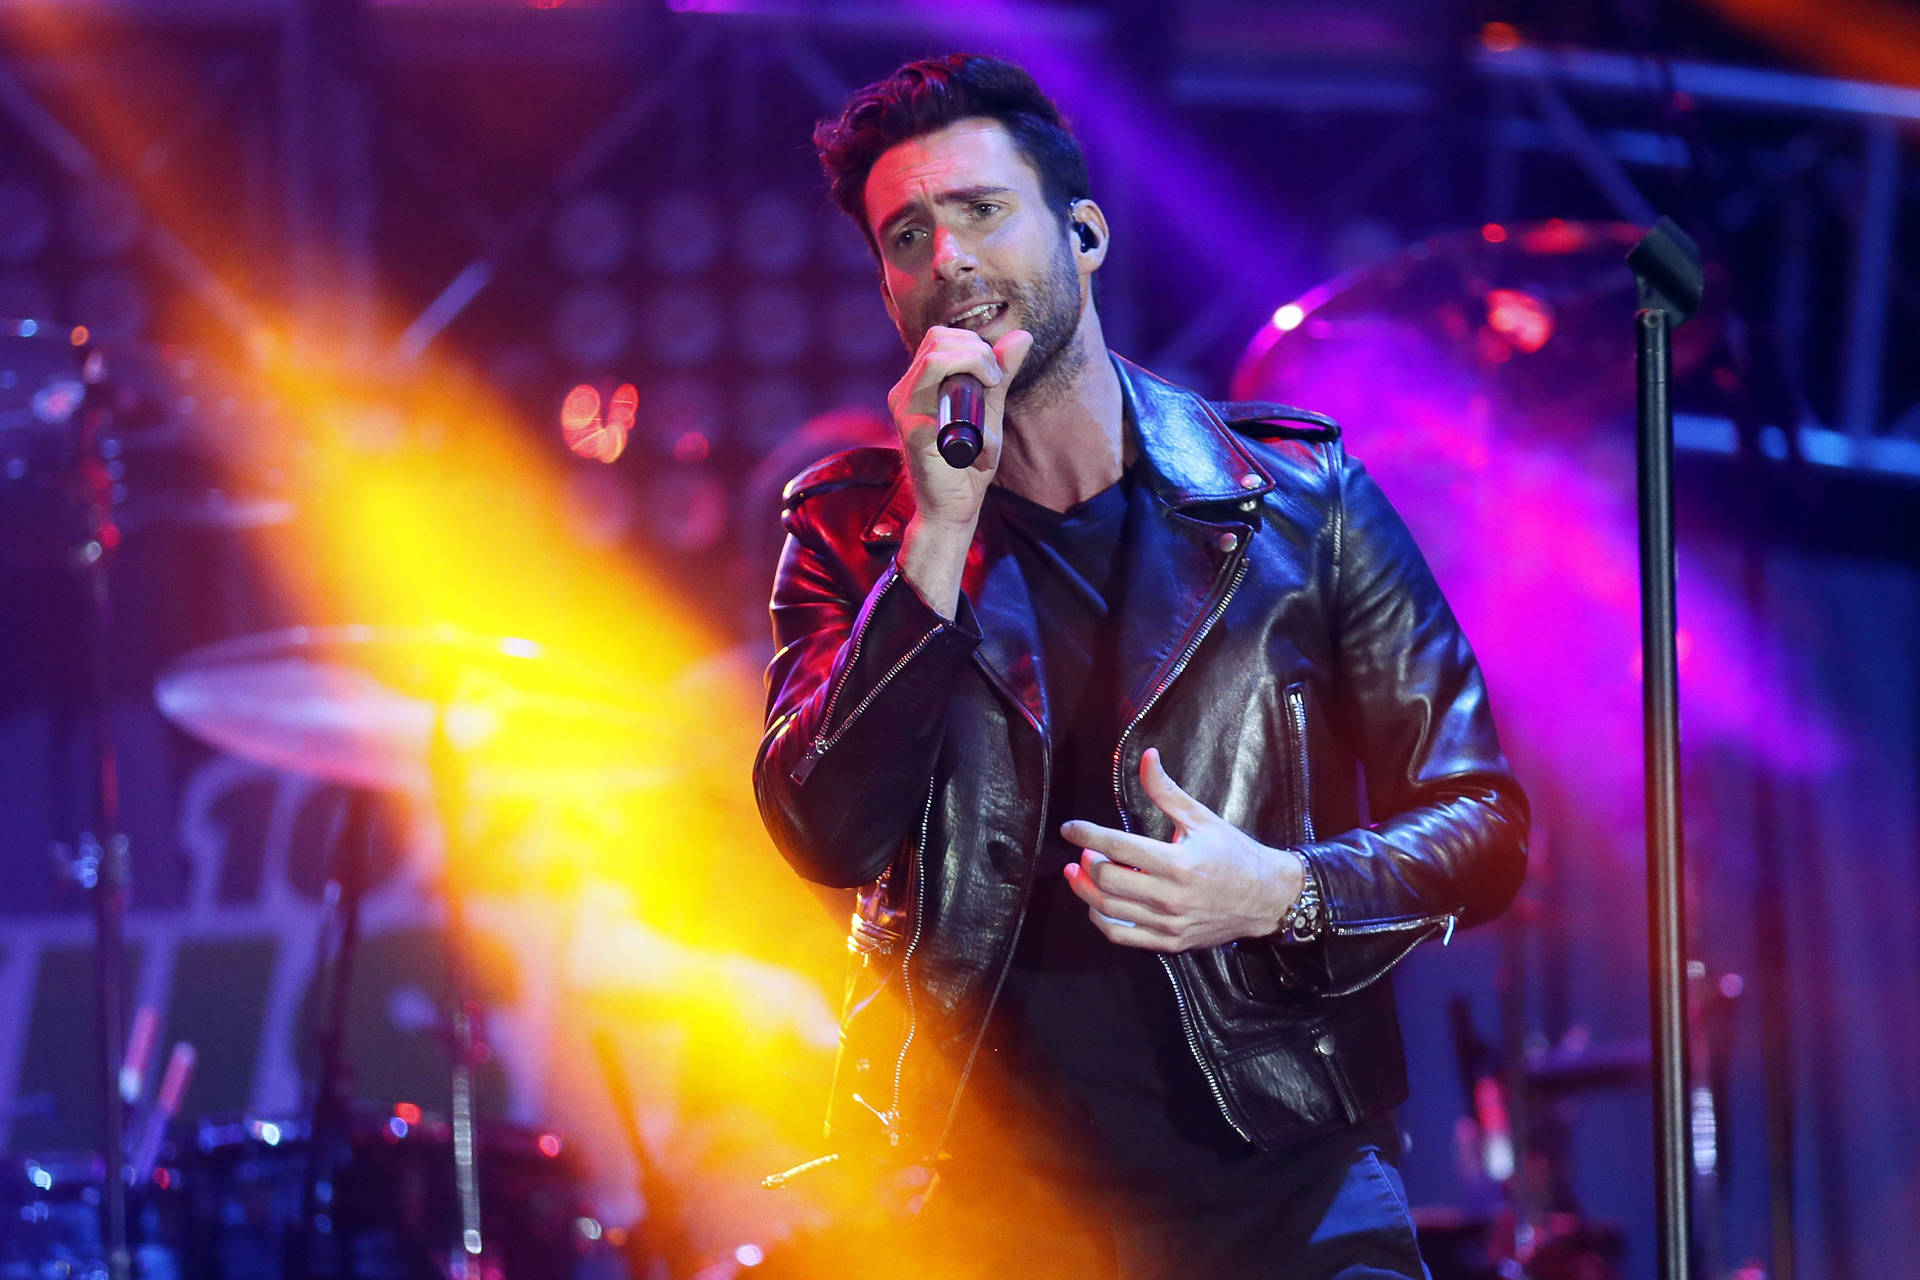 Adam Levine Flaunting His Style In A Black Leather Jacket Background